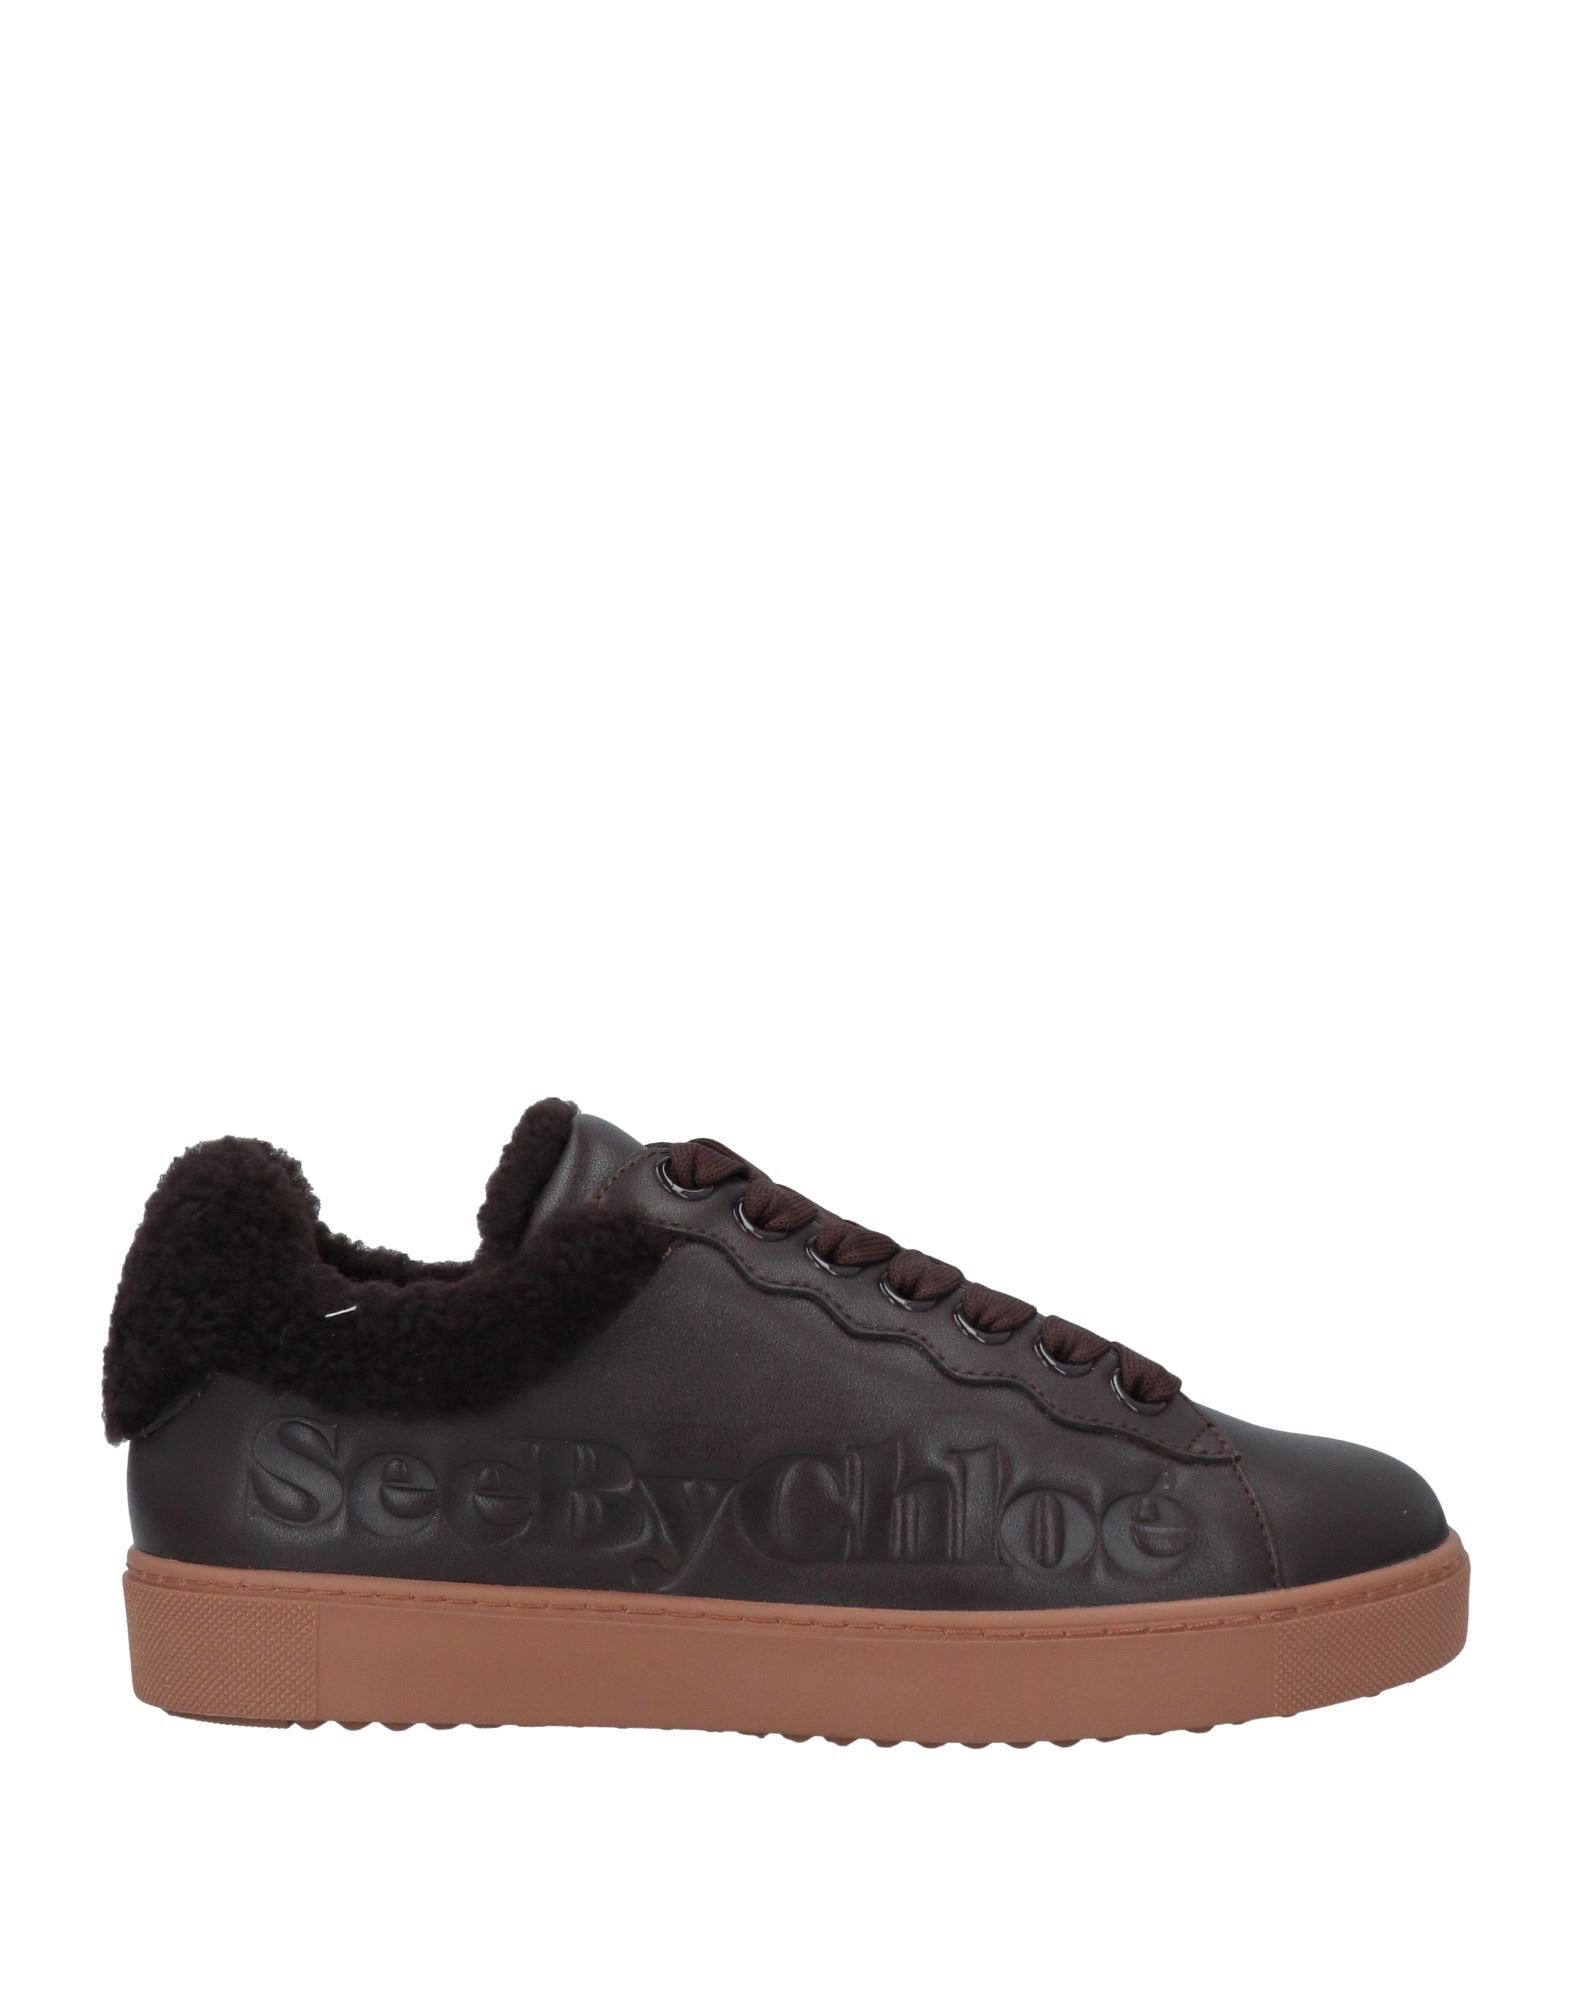 SEE BY CHLOÉ Sneakers | Smart Closet